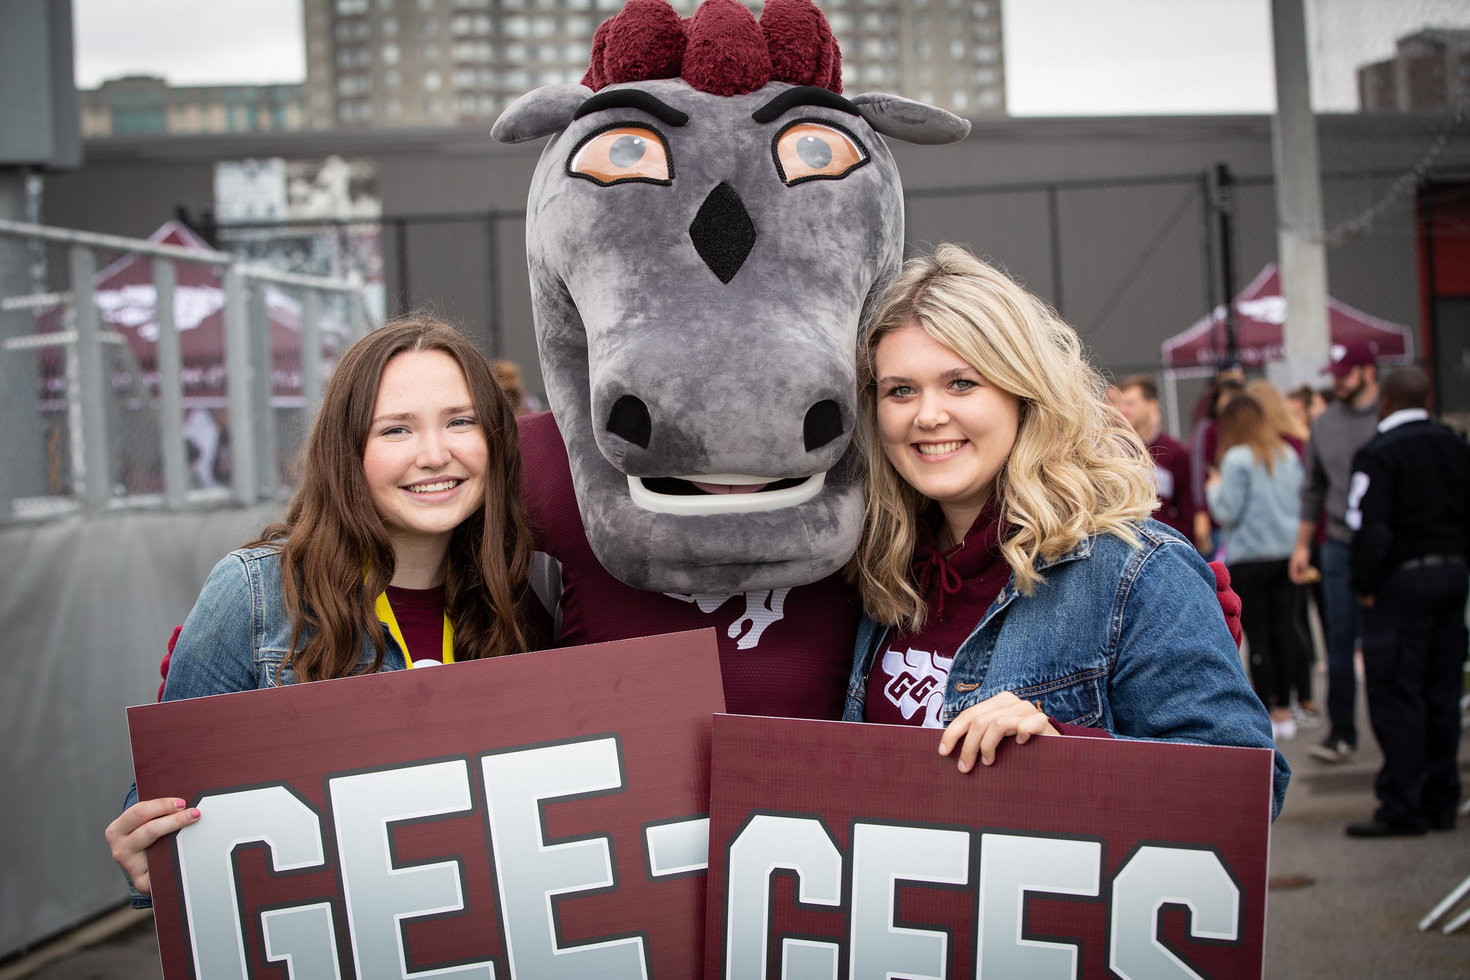 Gee-Gees fans with mascot